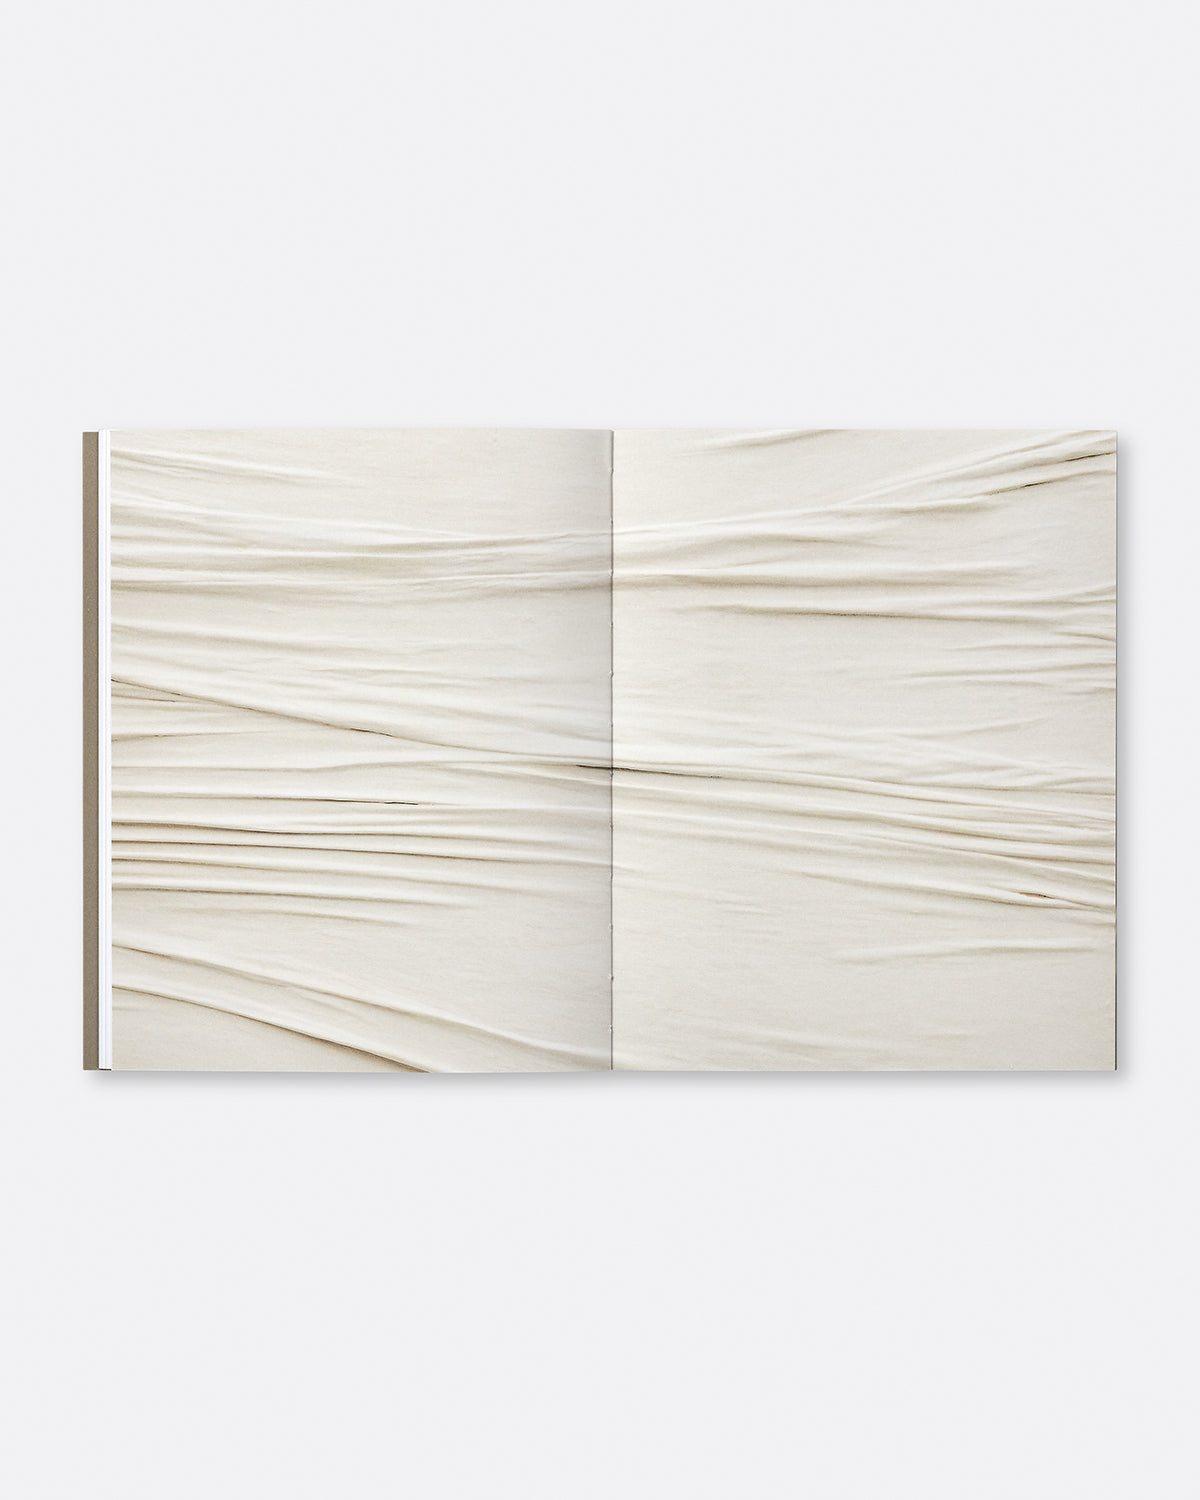 Piero Manzoni: The Twin Paintings Default Title